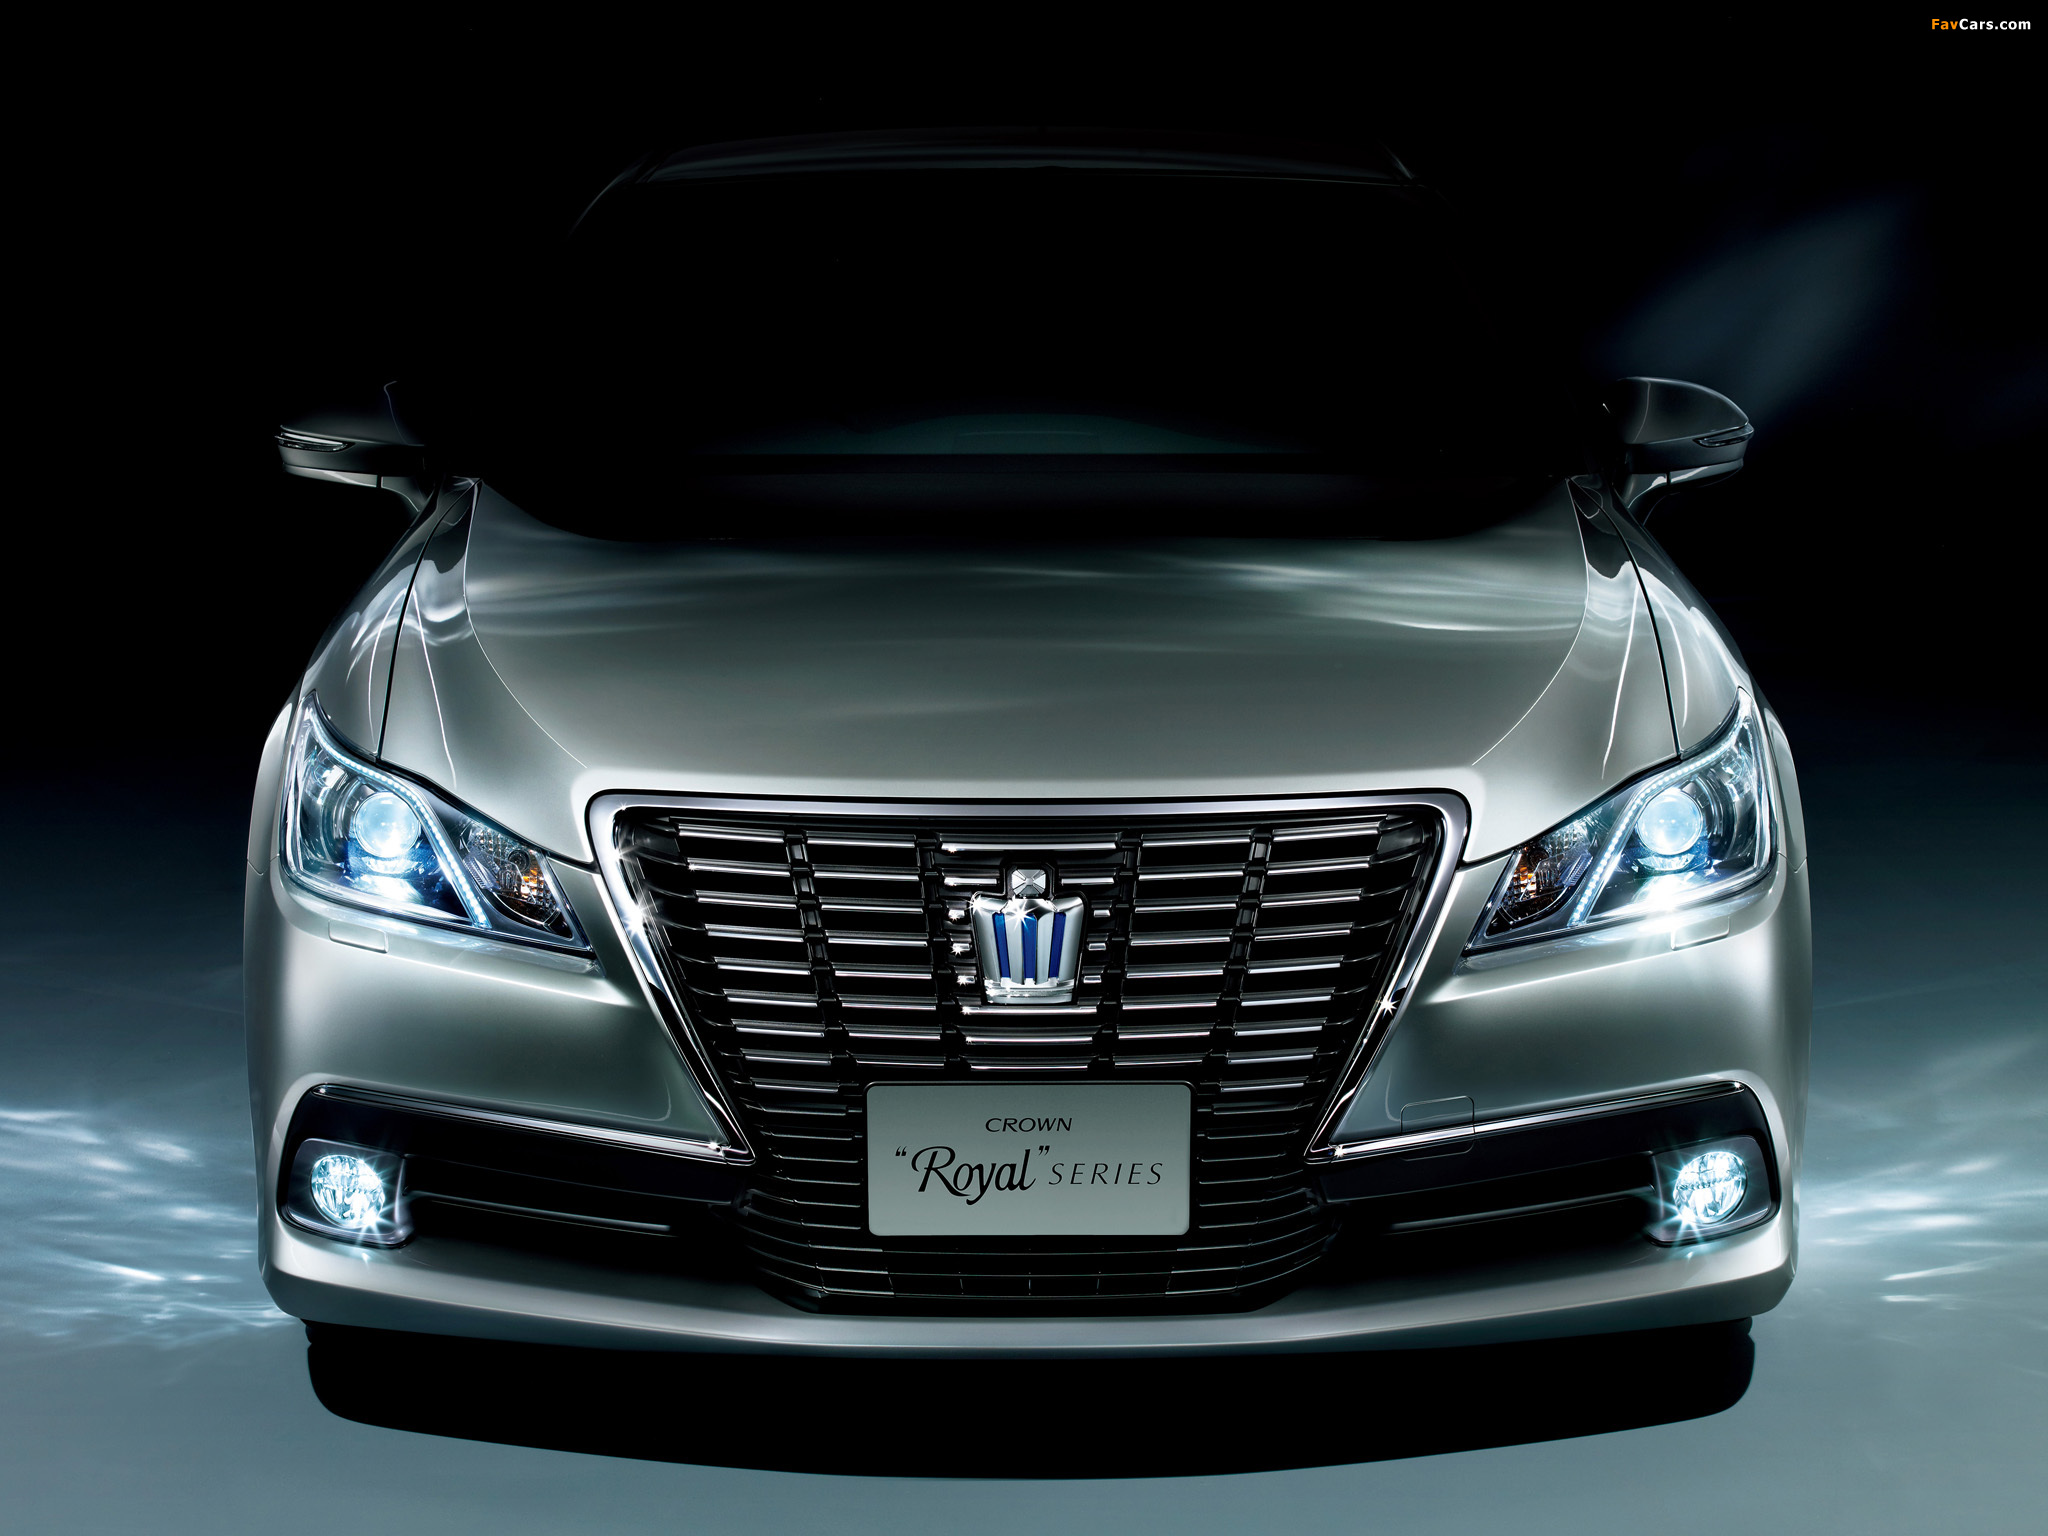 Toyota Crown Hybrid Royal Saloon (S210) 2012 pictures (2048 x 1536)